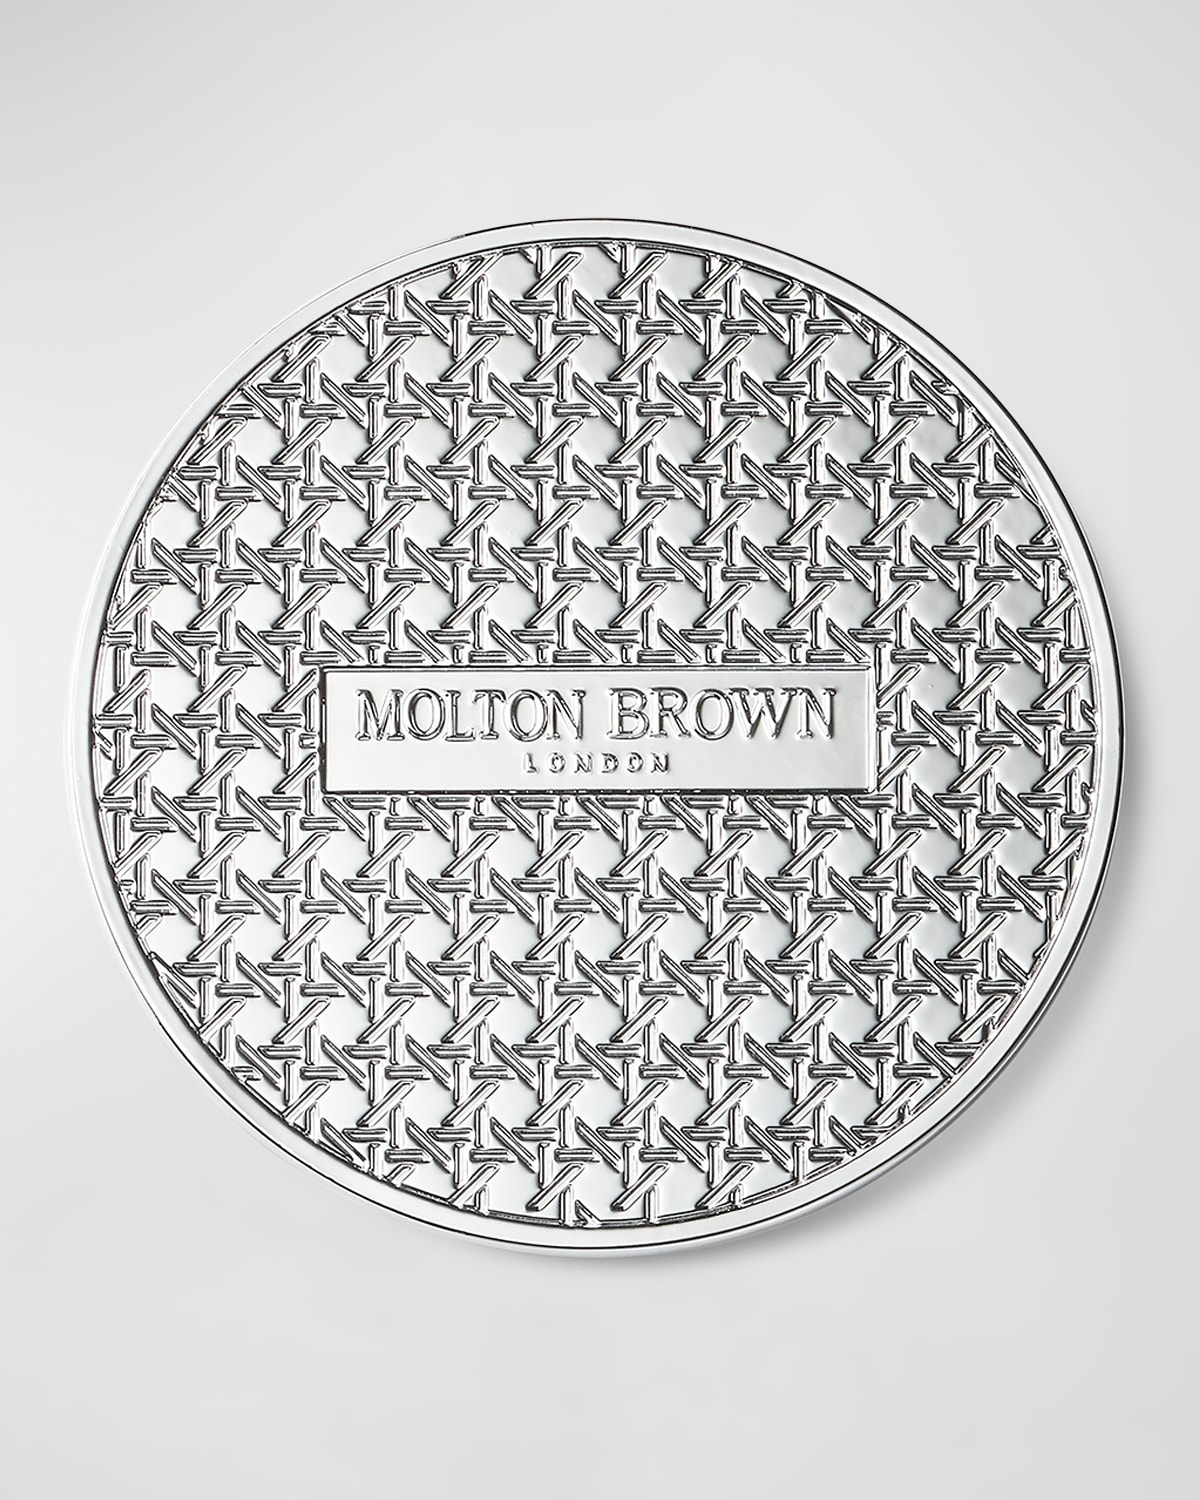 Molton Brown Signature Candle Lid, Single Wick